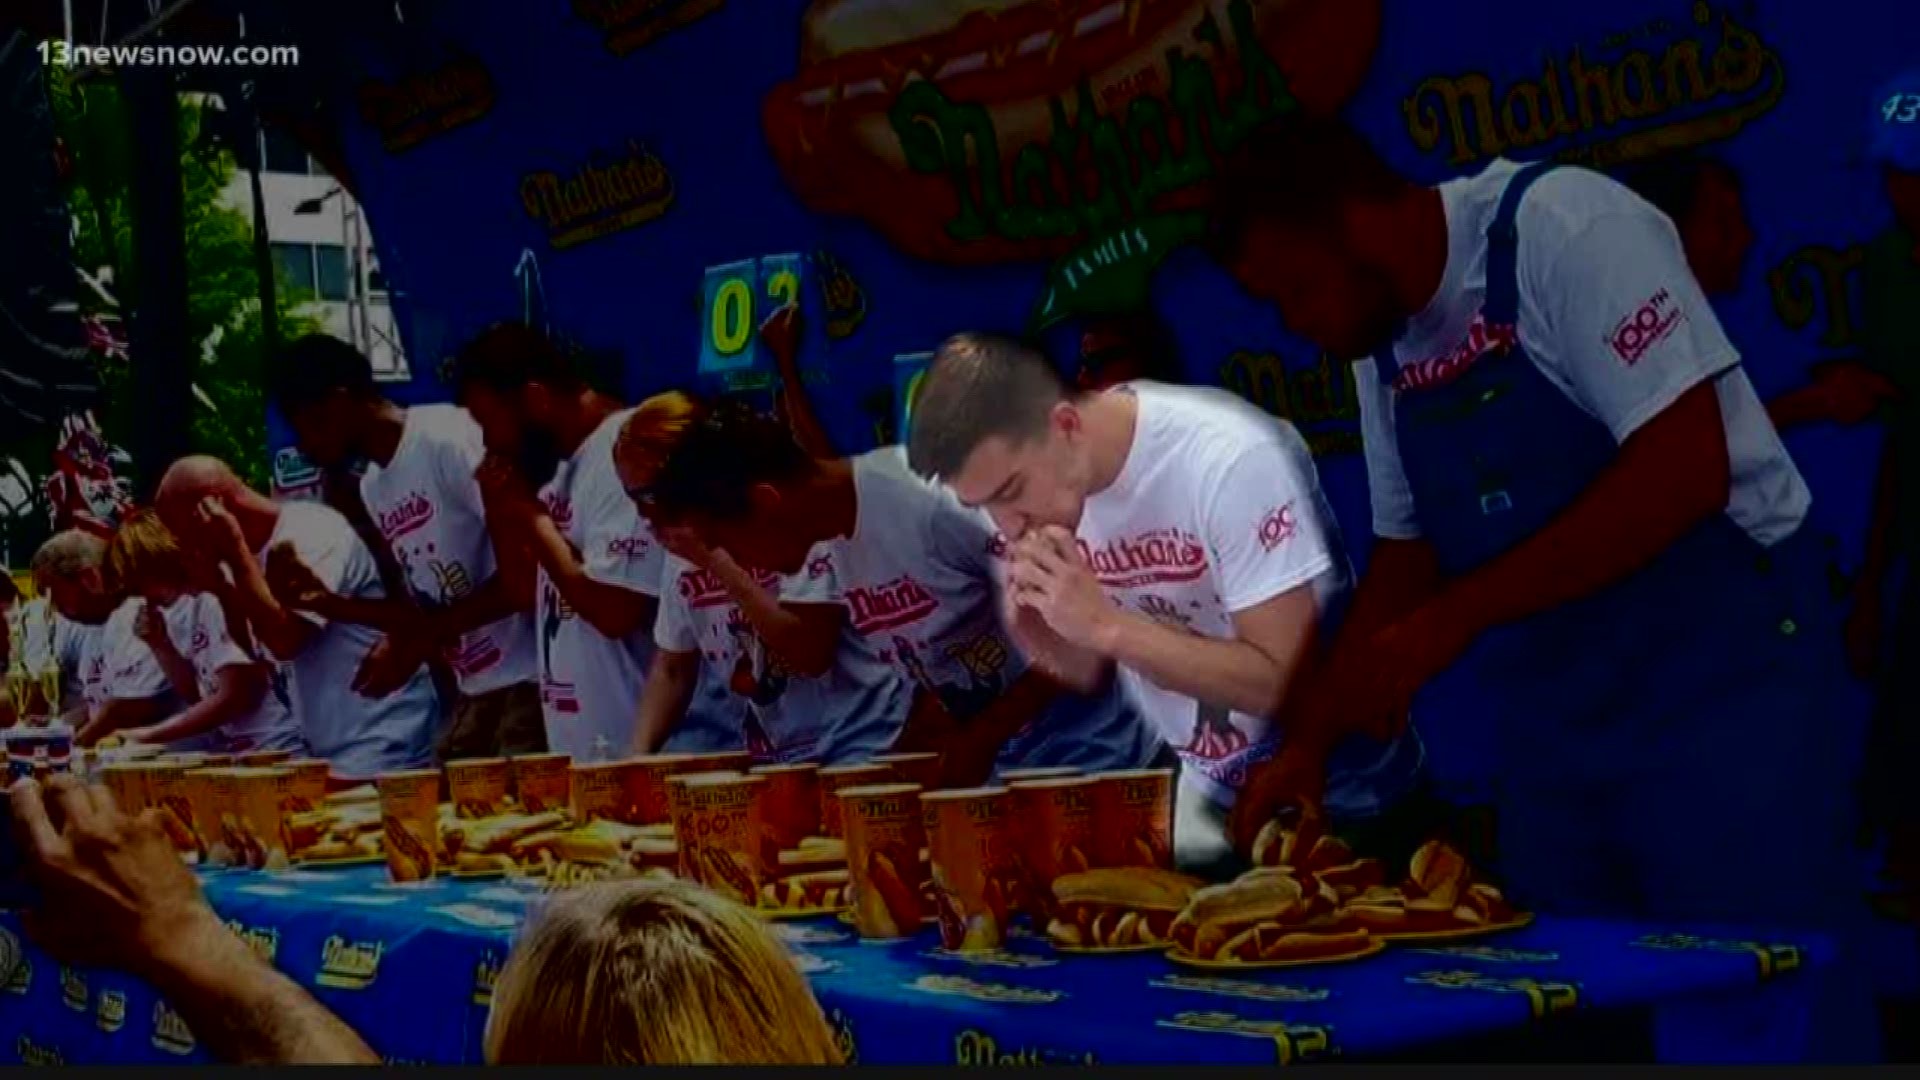 This weekend at Harborfest, contestants will chow down at the Nathan's Hot Dog Eating Contest Virginia Qualifier.